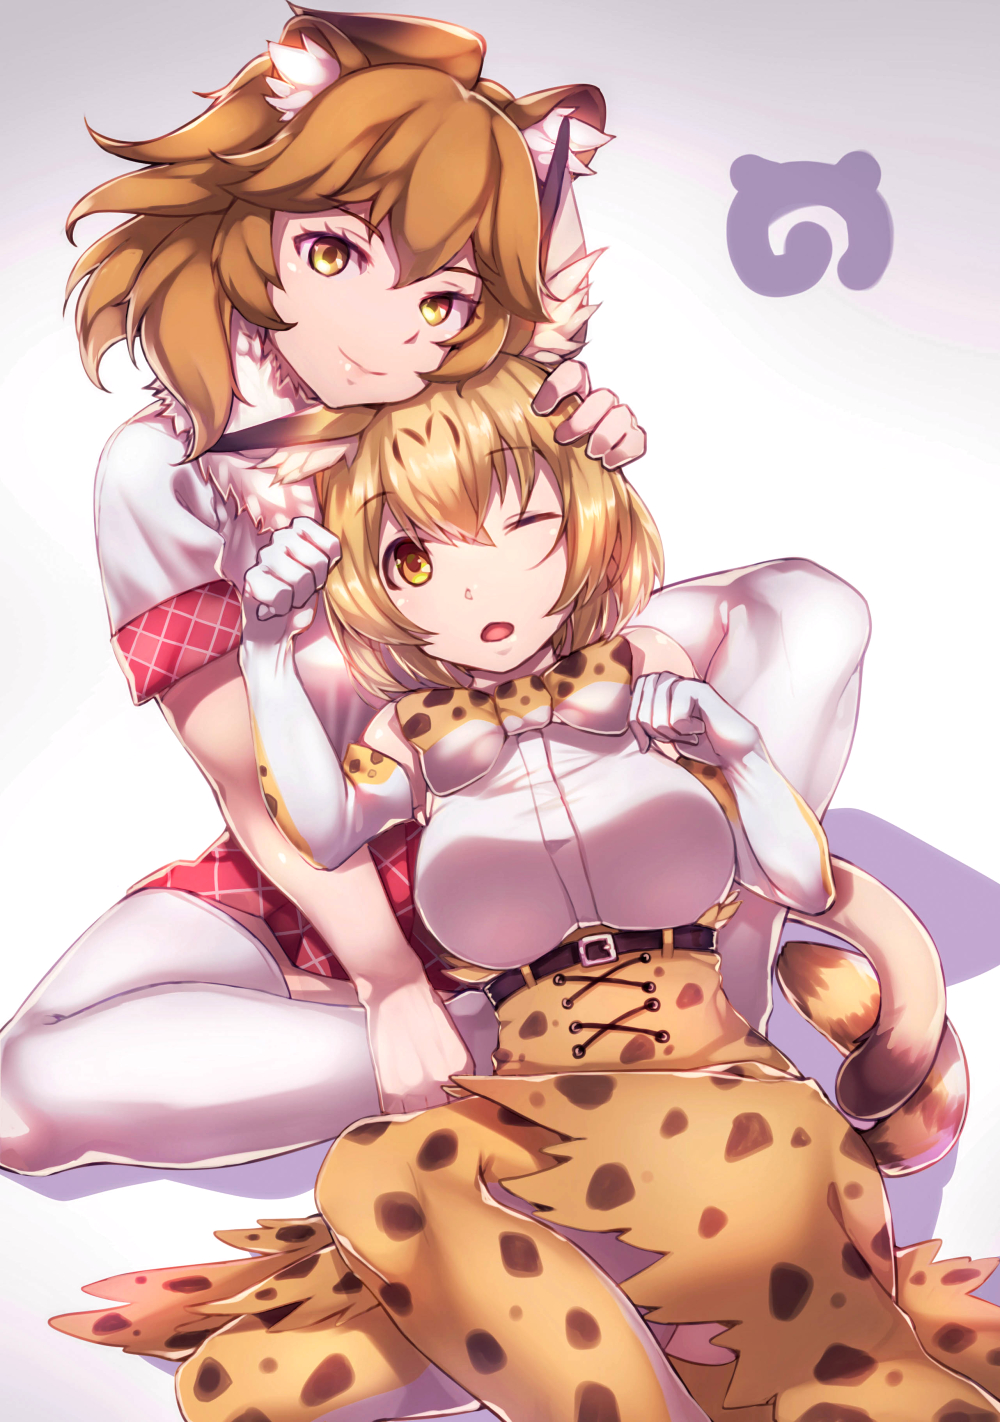 2girls animal_ears blonde_hair bow bowtie breasts brown_hair closed_mouth elbow_gloves gloves highres kemono_friends lion_(kemono_friends) looking_at_viewer medium_breasts multiple_girls one_eye_closed open_mouth serval_(kemono_friends) serval_ears serval_print serval_tail short_hair skirt smile tail thigh-highs white_gloves white_legwear yamaori yellow_eyes yellow_legwear yellow_skirt